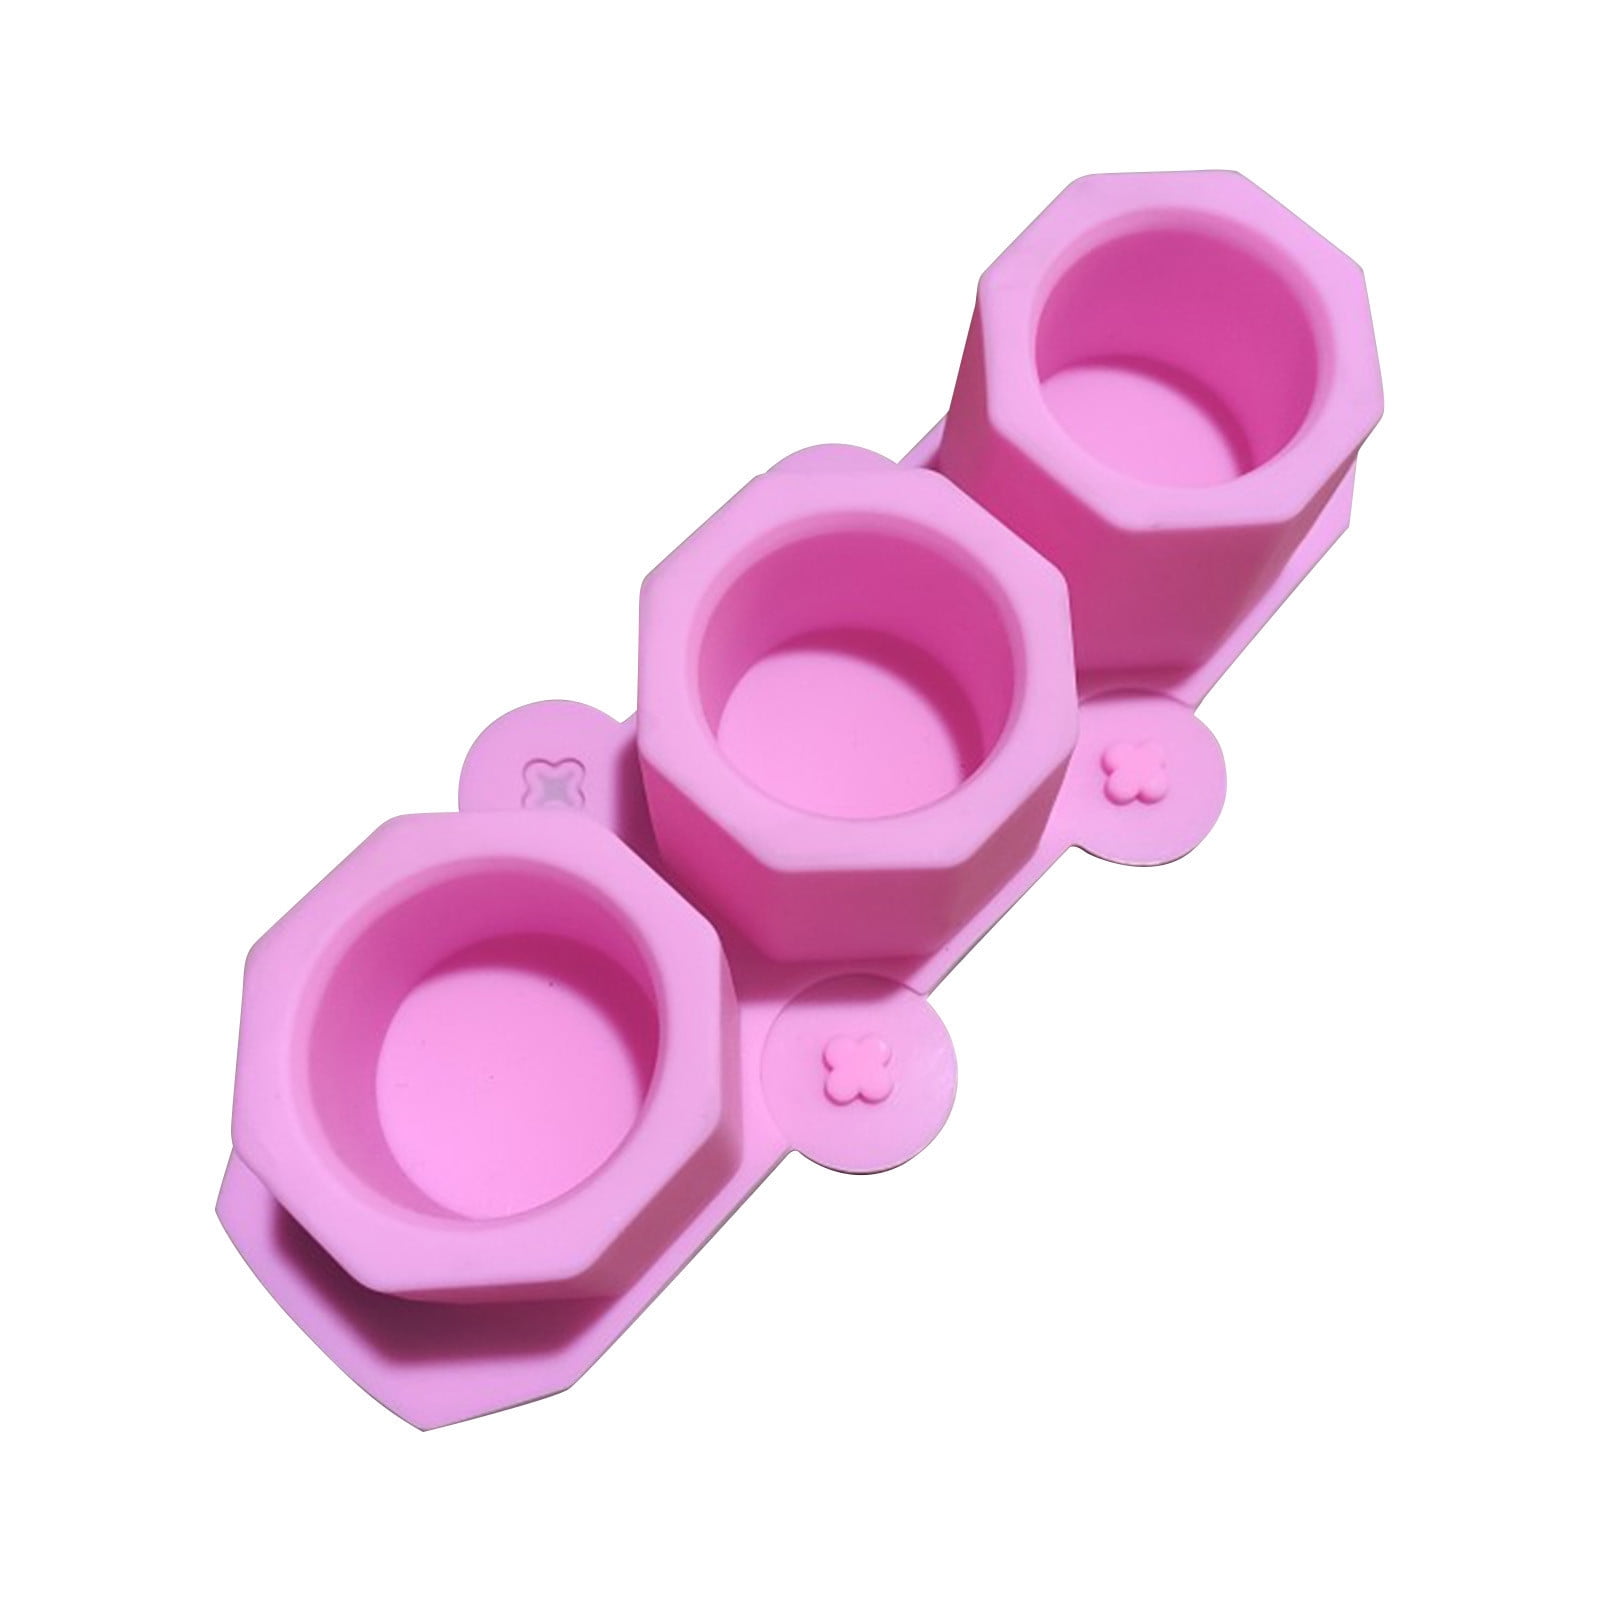 Dropship 1pc Silicone Ice Cube Tray; 3 Cavities Silicone Popsicle Mold; Ice  Maker Mold; Pink/Blue/Green to Sell Online at a Lower Price